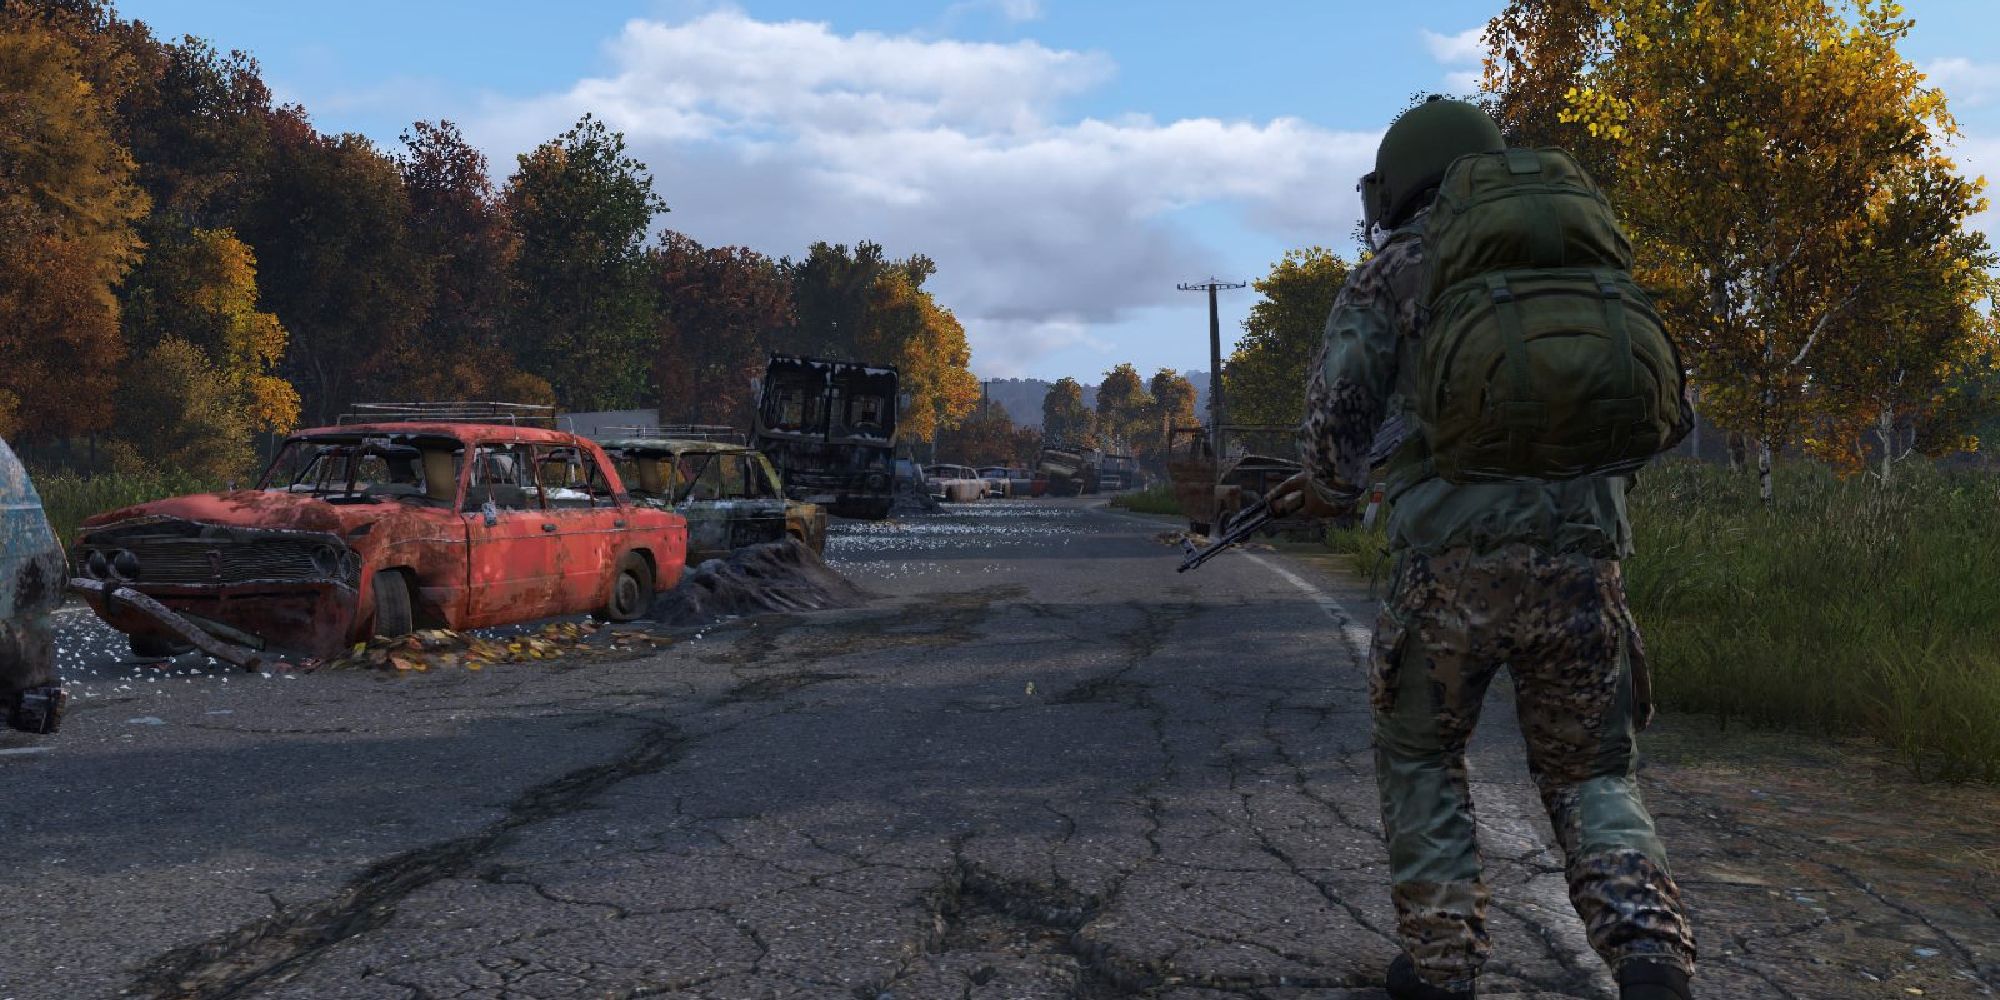 A player runs through the desolate streets filled with abandoned cars, a combat backpack 